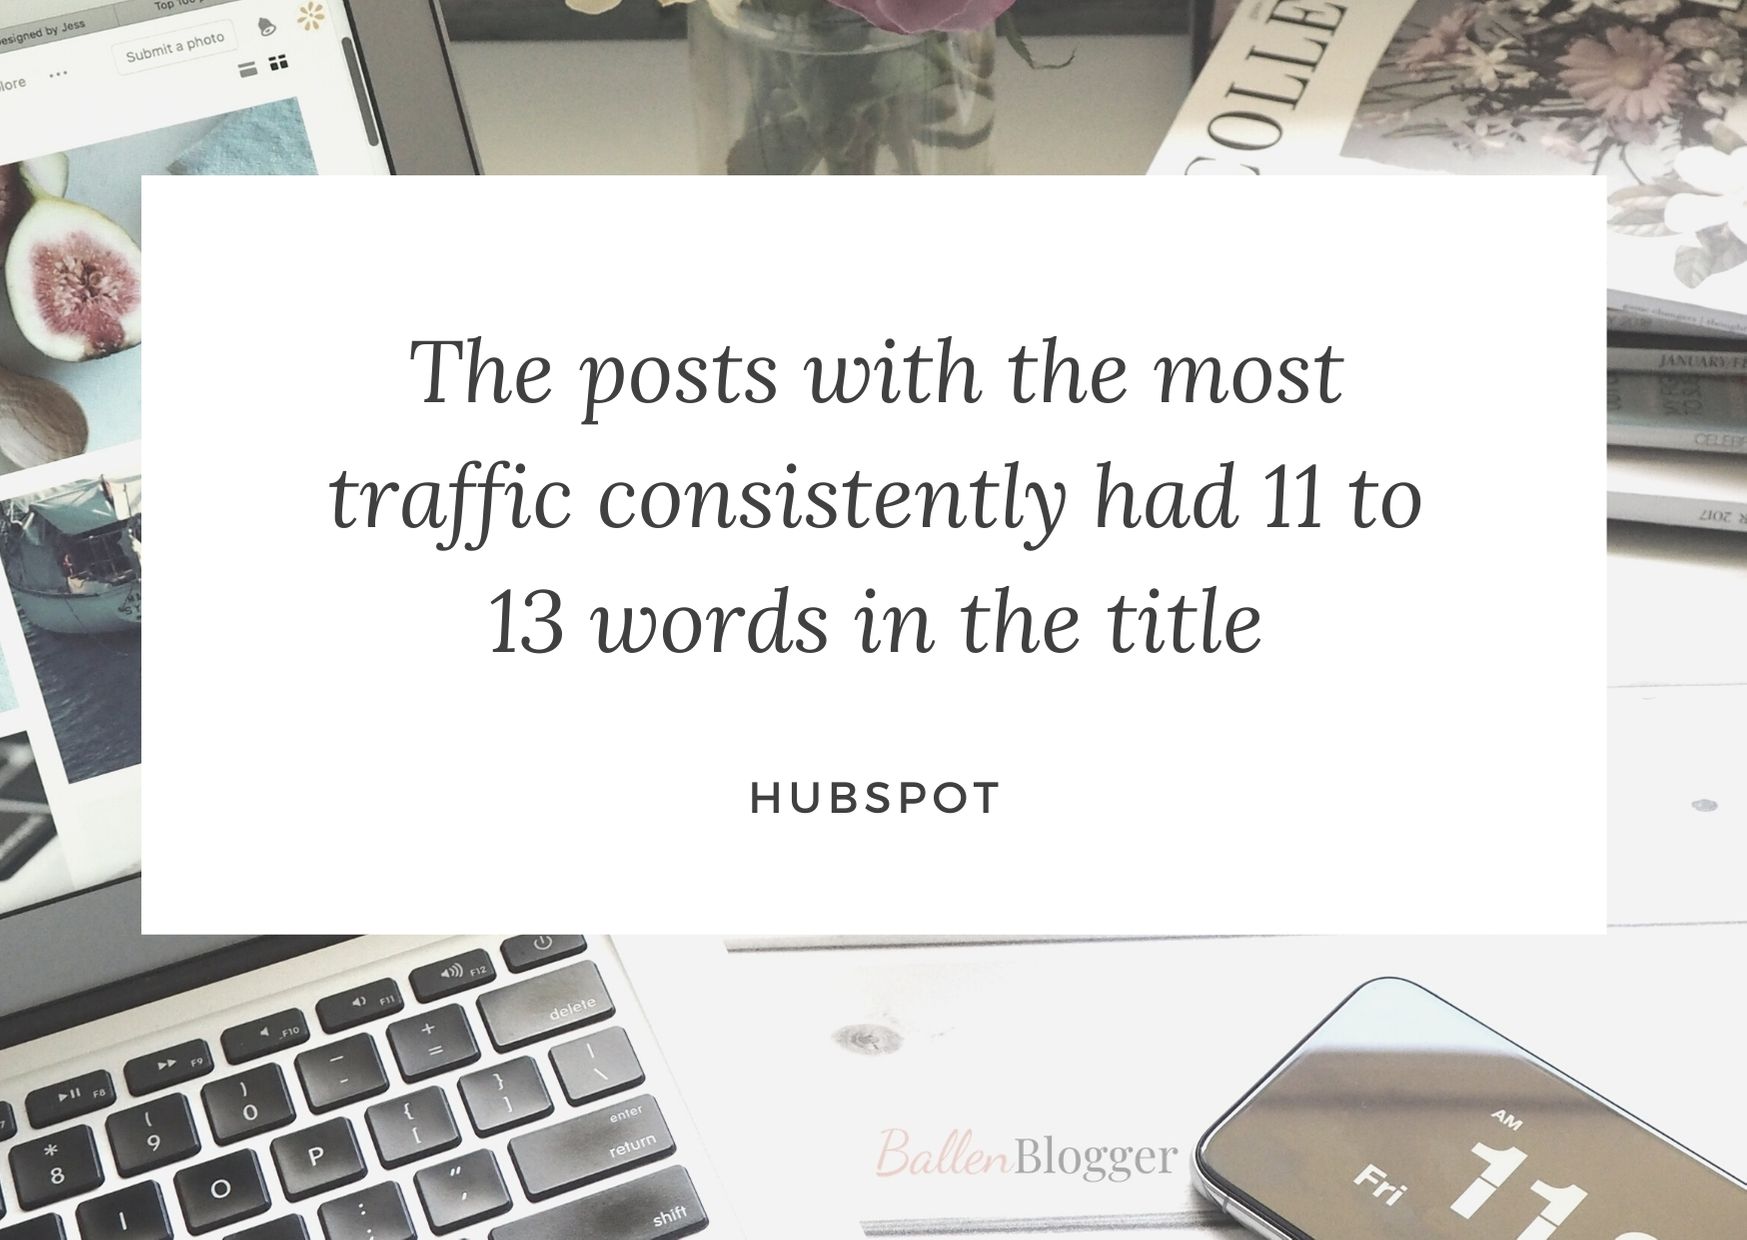 Hubspot says that in their study, they showed that the posts with the most traffic consistently had 11 to 13 words in the title. 